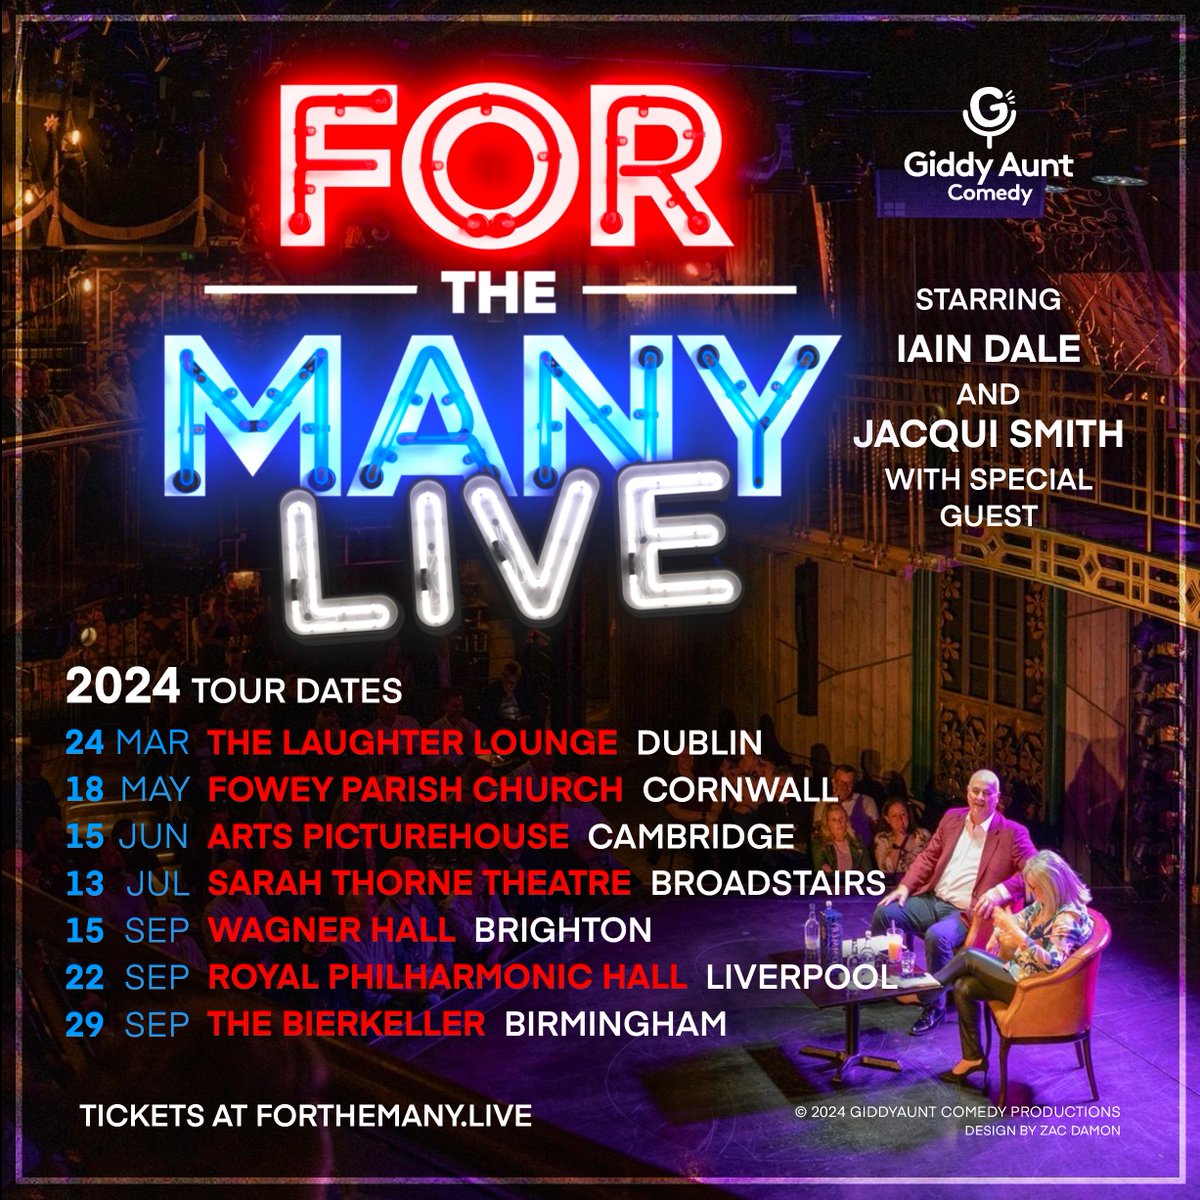 Tickets for FOR THE MANY LIVE! in Fowey, Cambridge Brighton, Liverpool & Birmingham are now on sale at forthemany.live